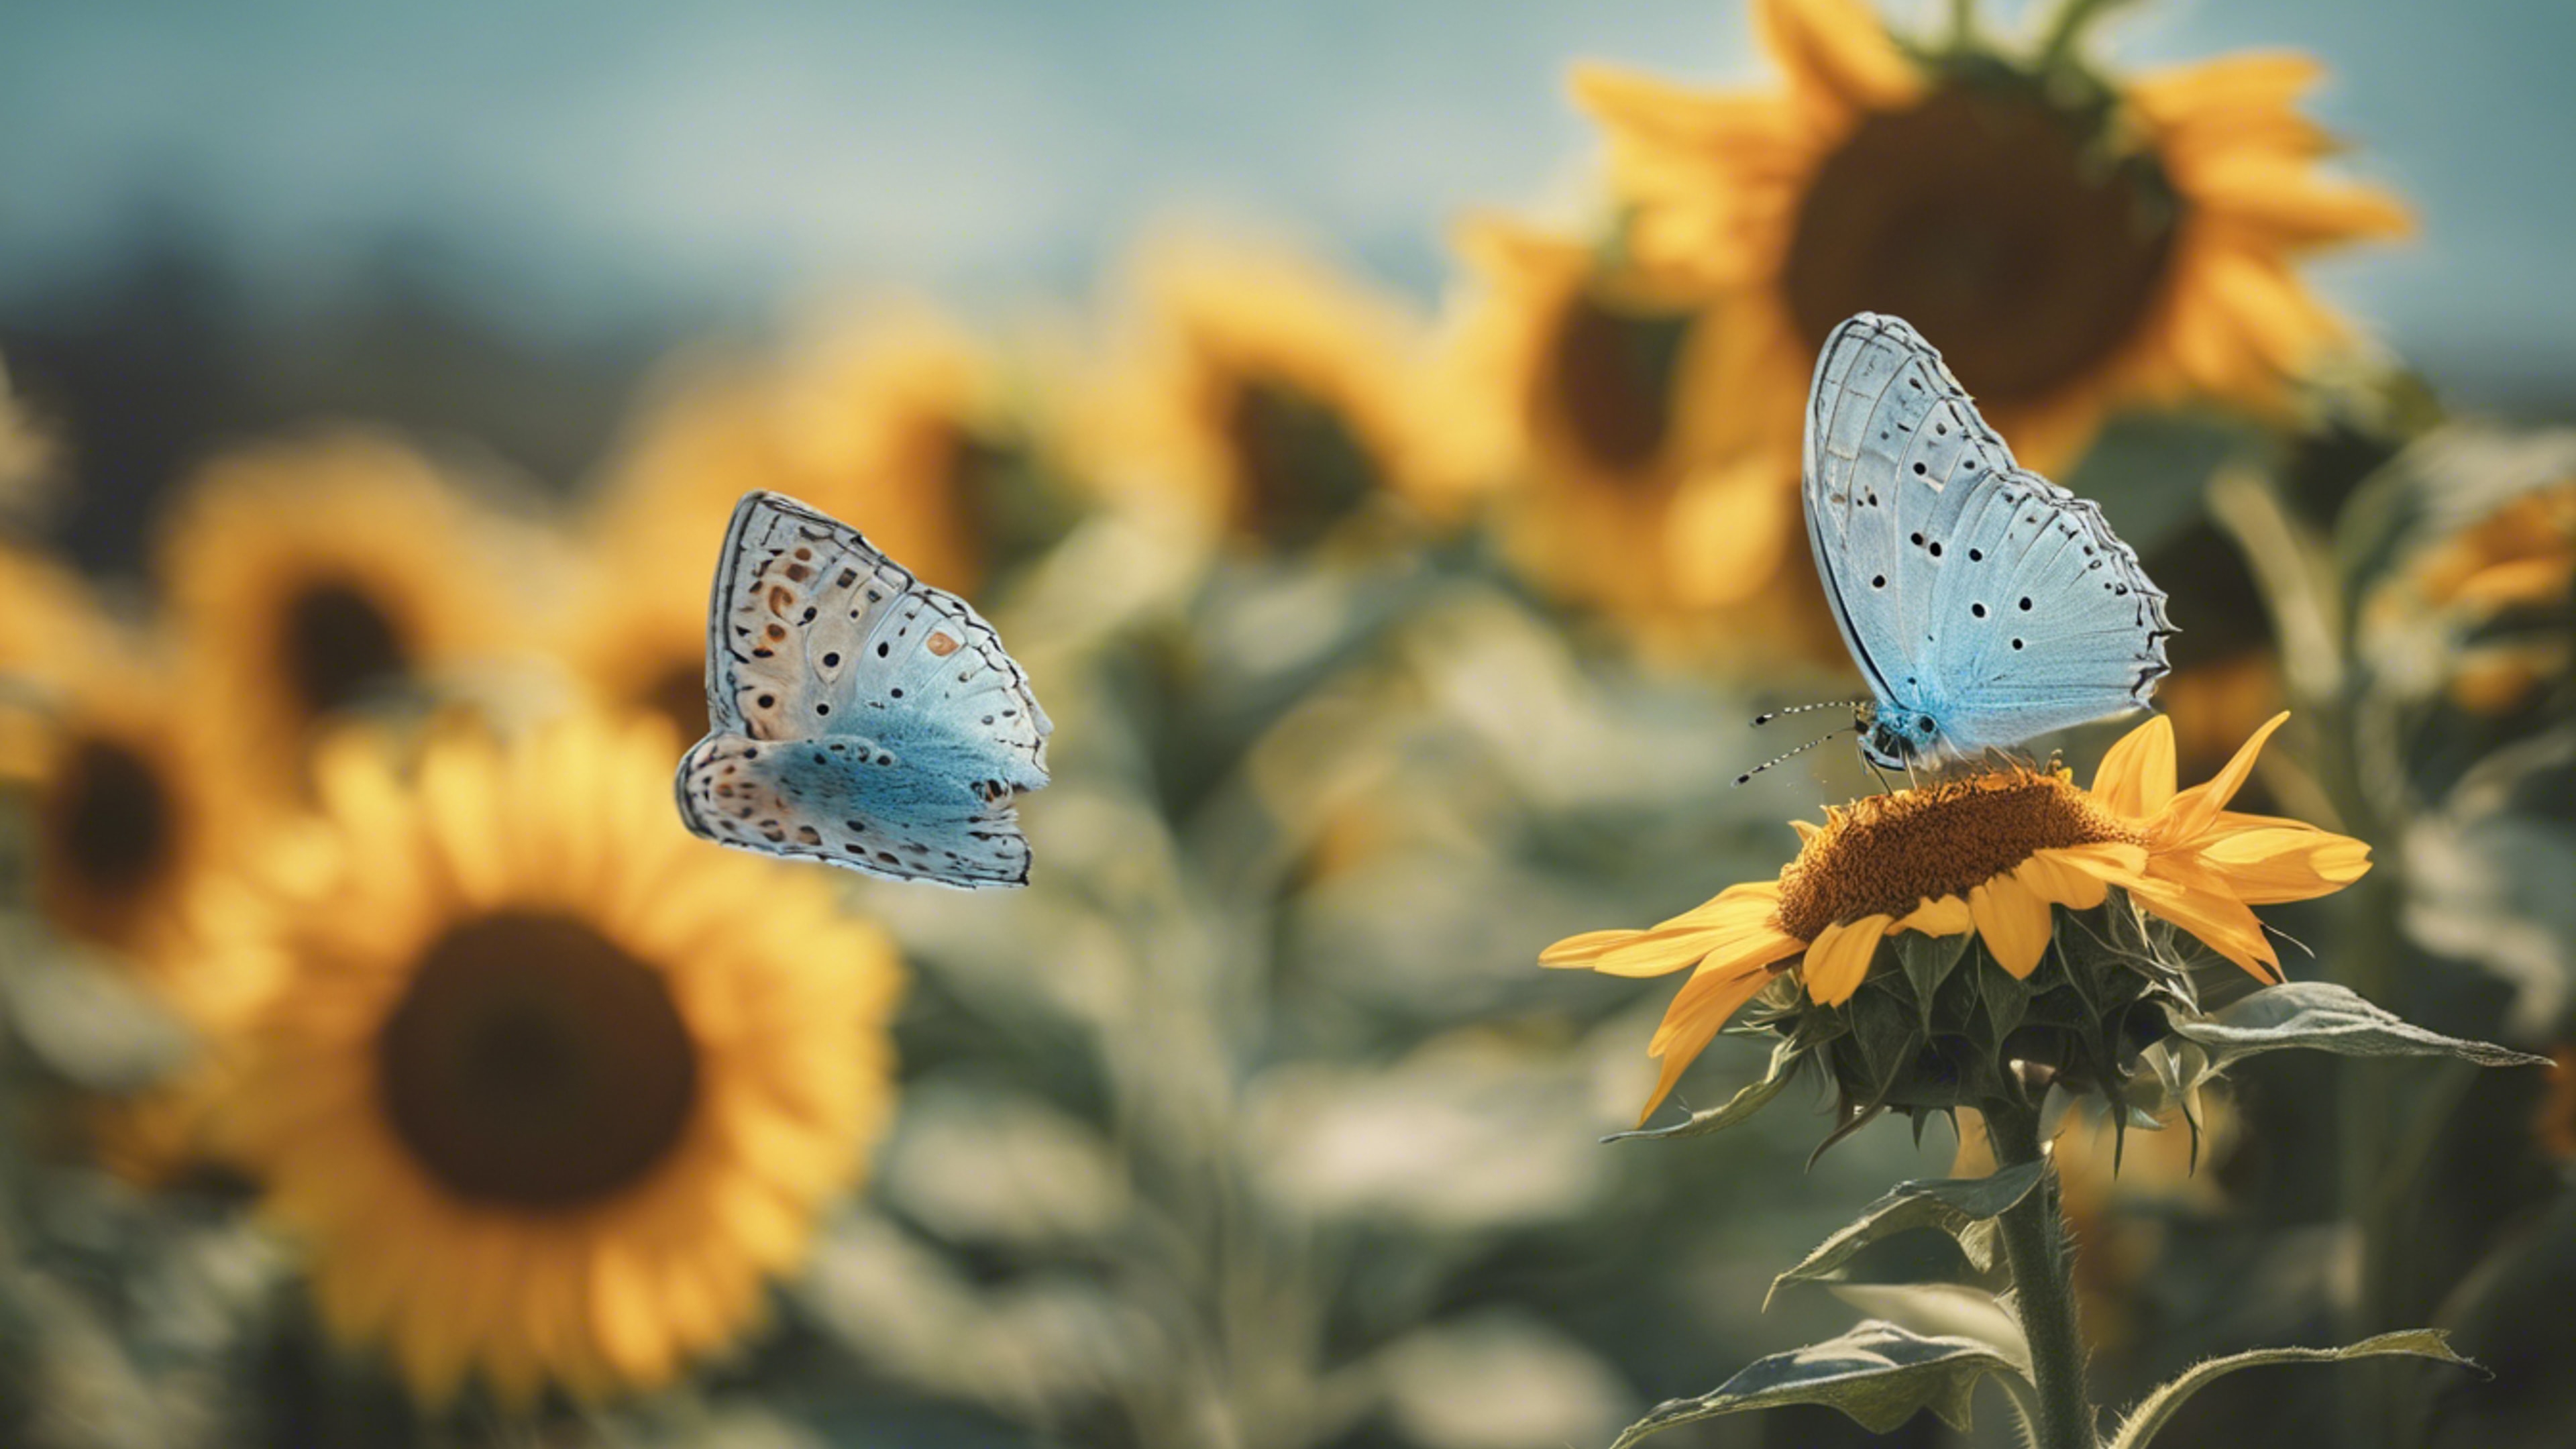 A pastel blue spotted butterfly resting on a sunflower. Wallpaper[f5640df3fefb4cee9f34]